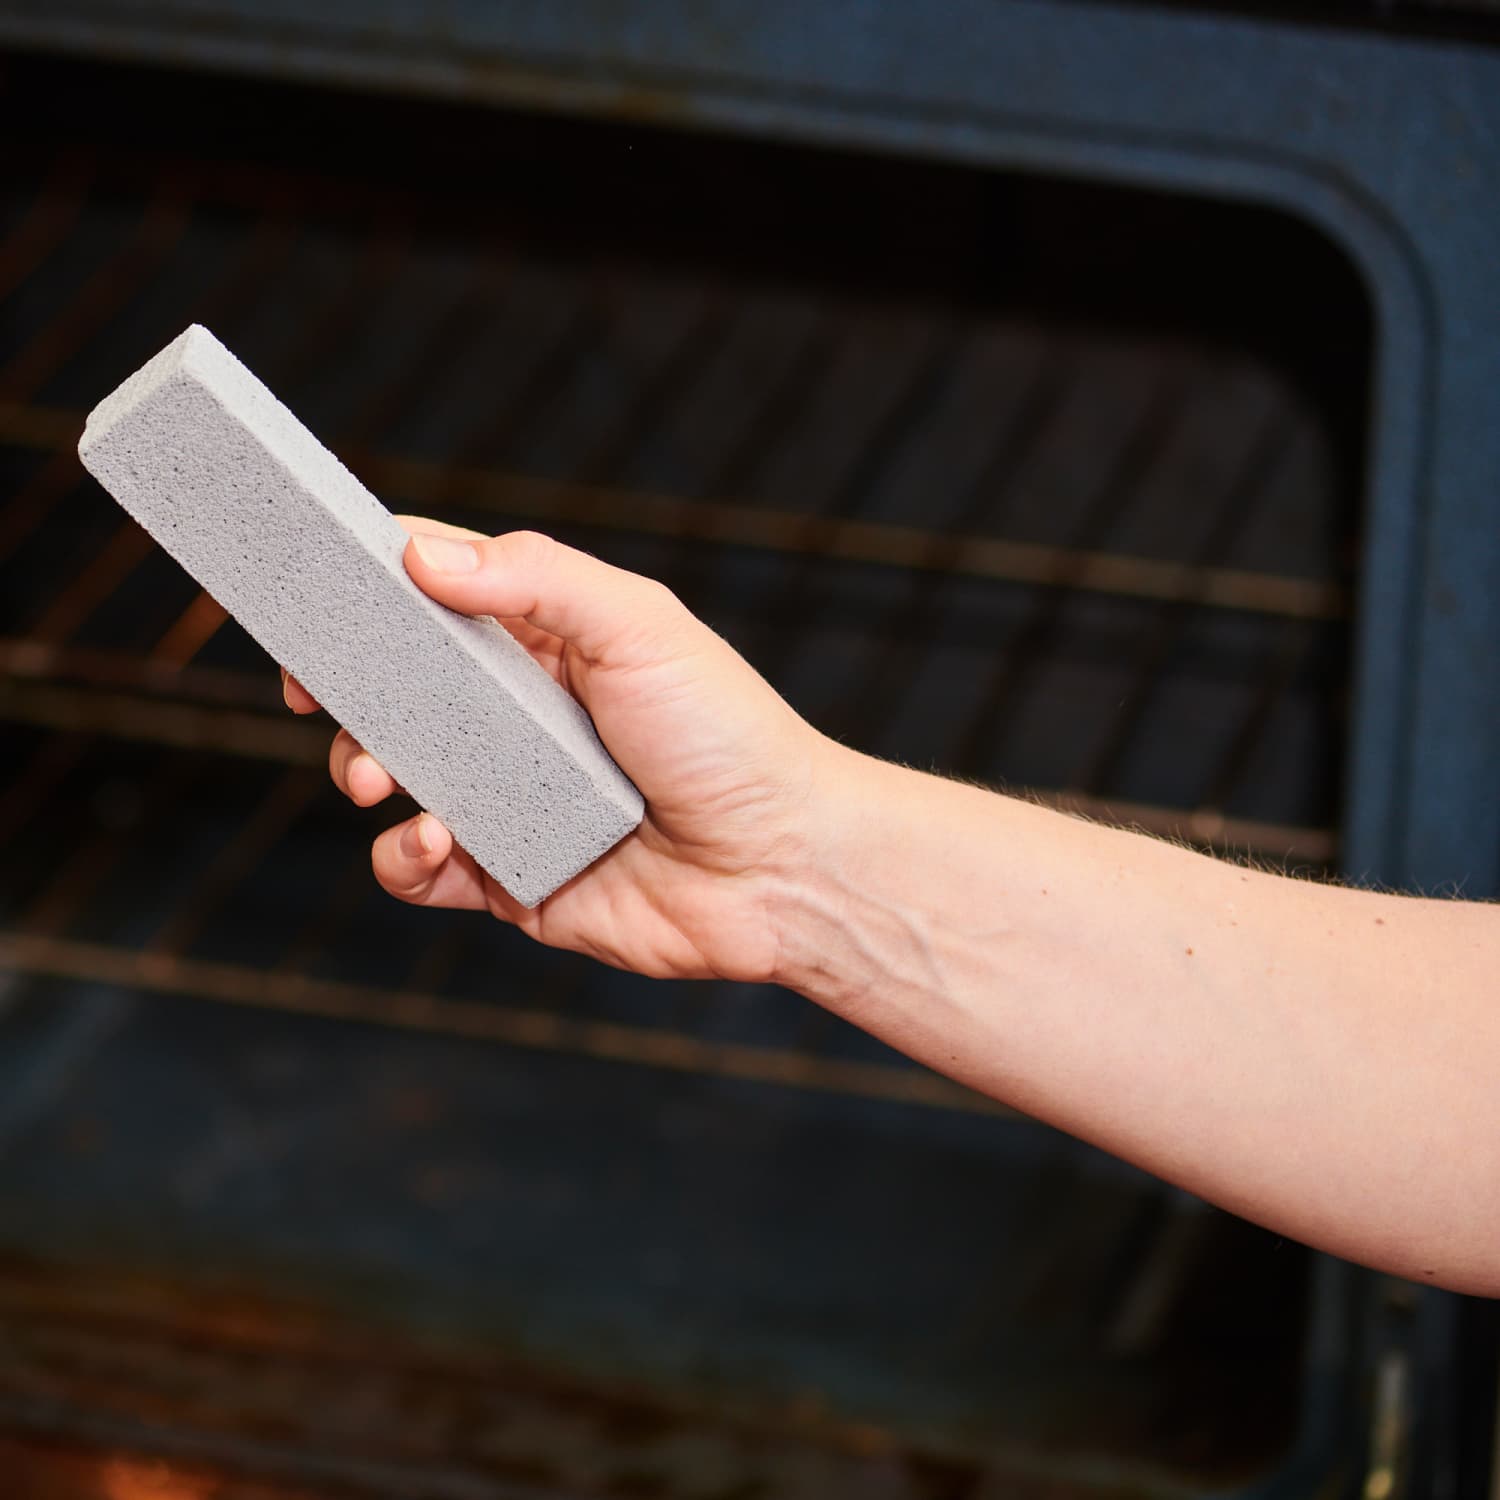 Use a Pumice Stone to Clean an Oven - Before & After Photos